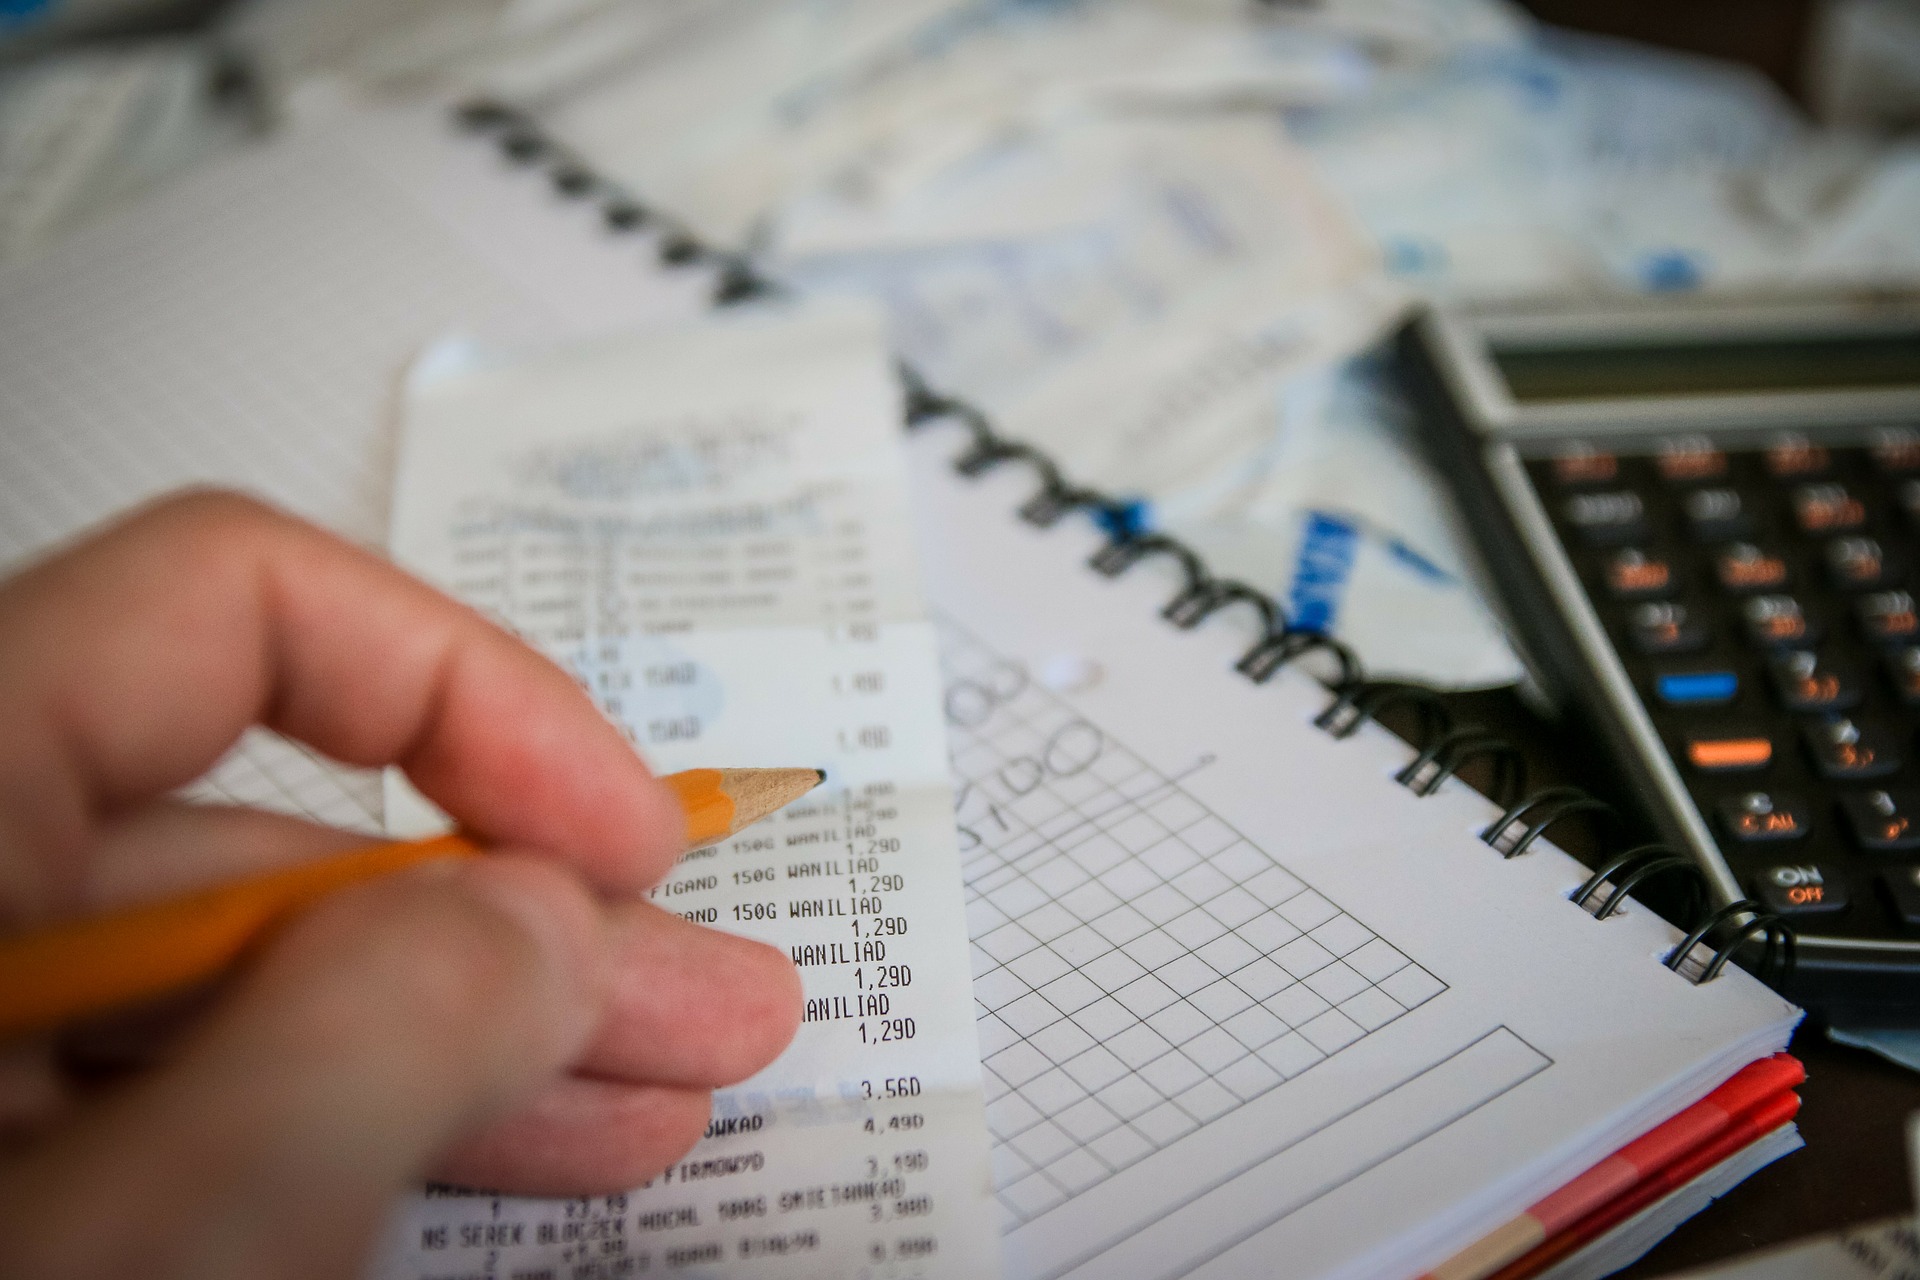 A close-up picture of receipts, notebook, and calculator on a tabletop. There is a hand holding a pencil above one of the receipts. 